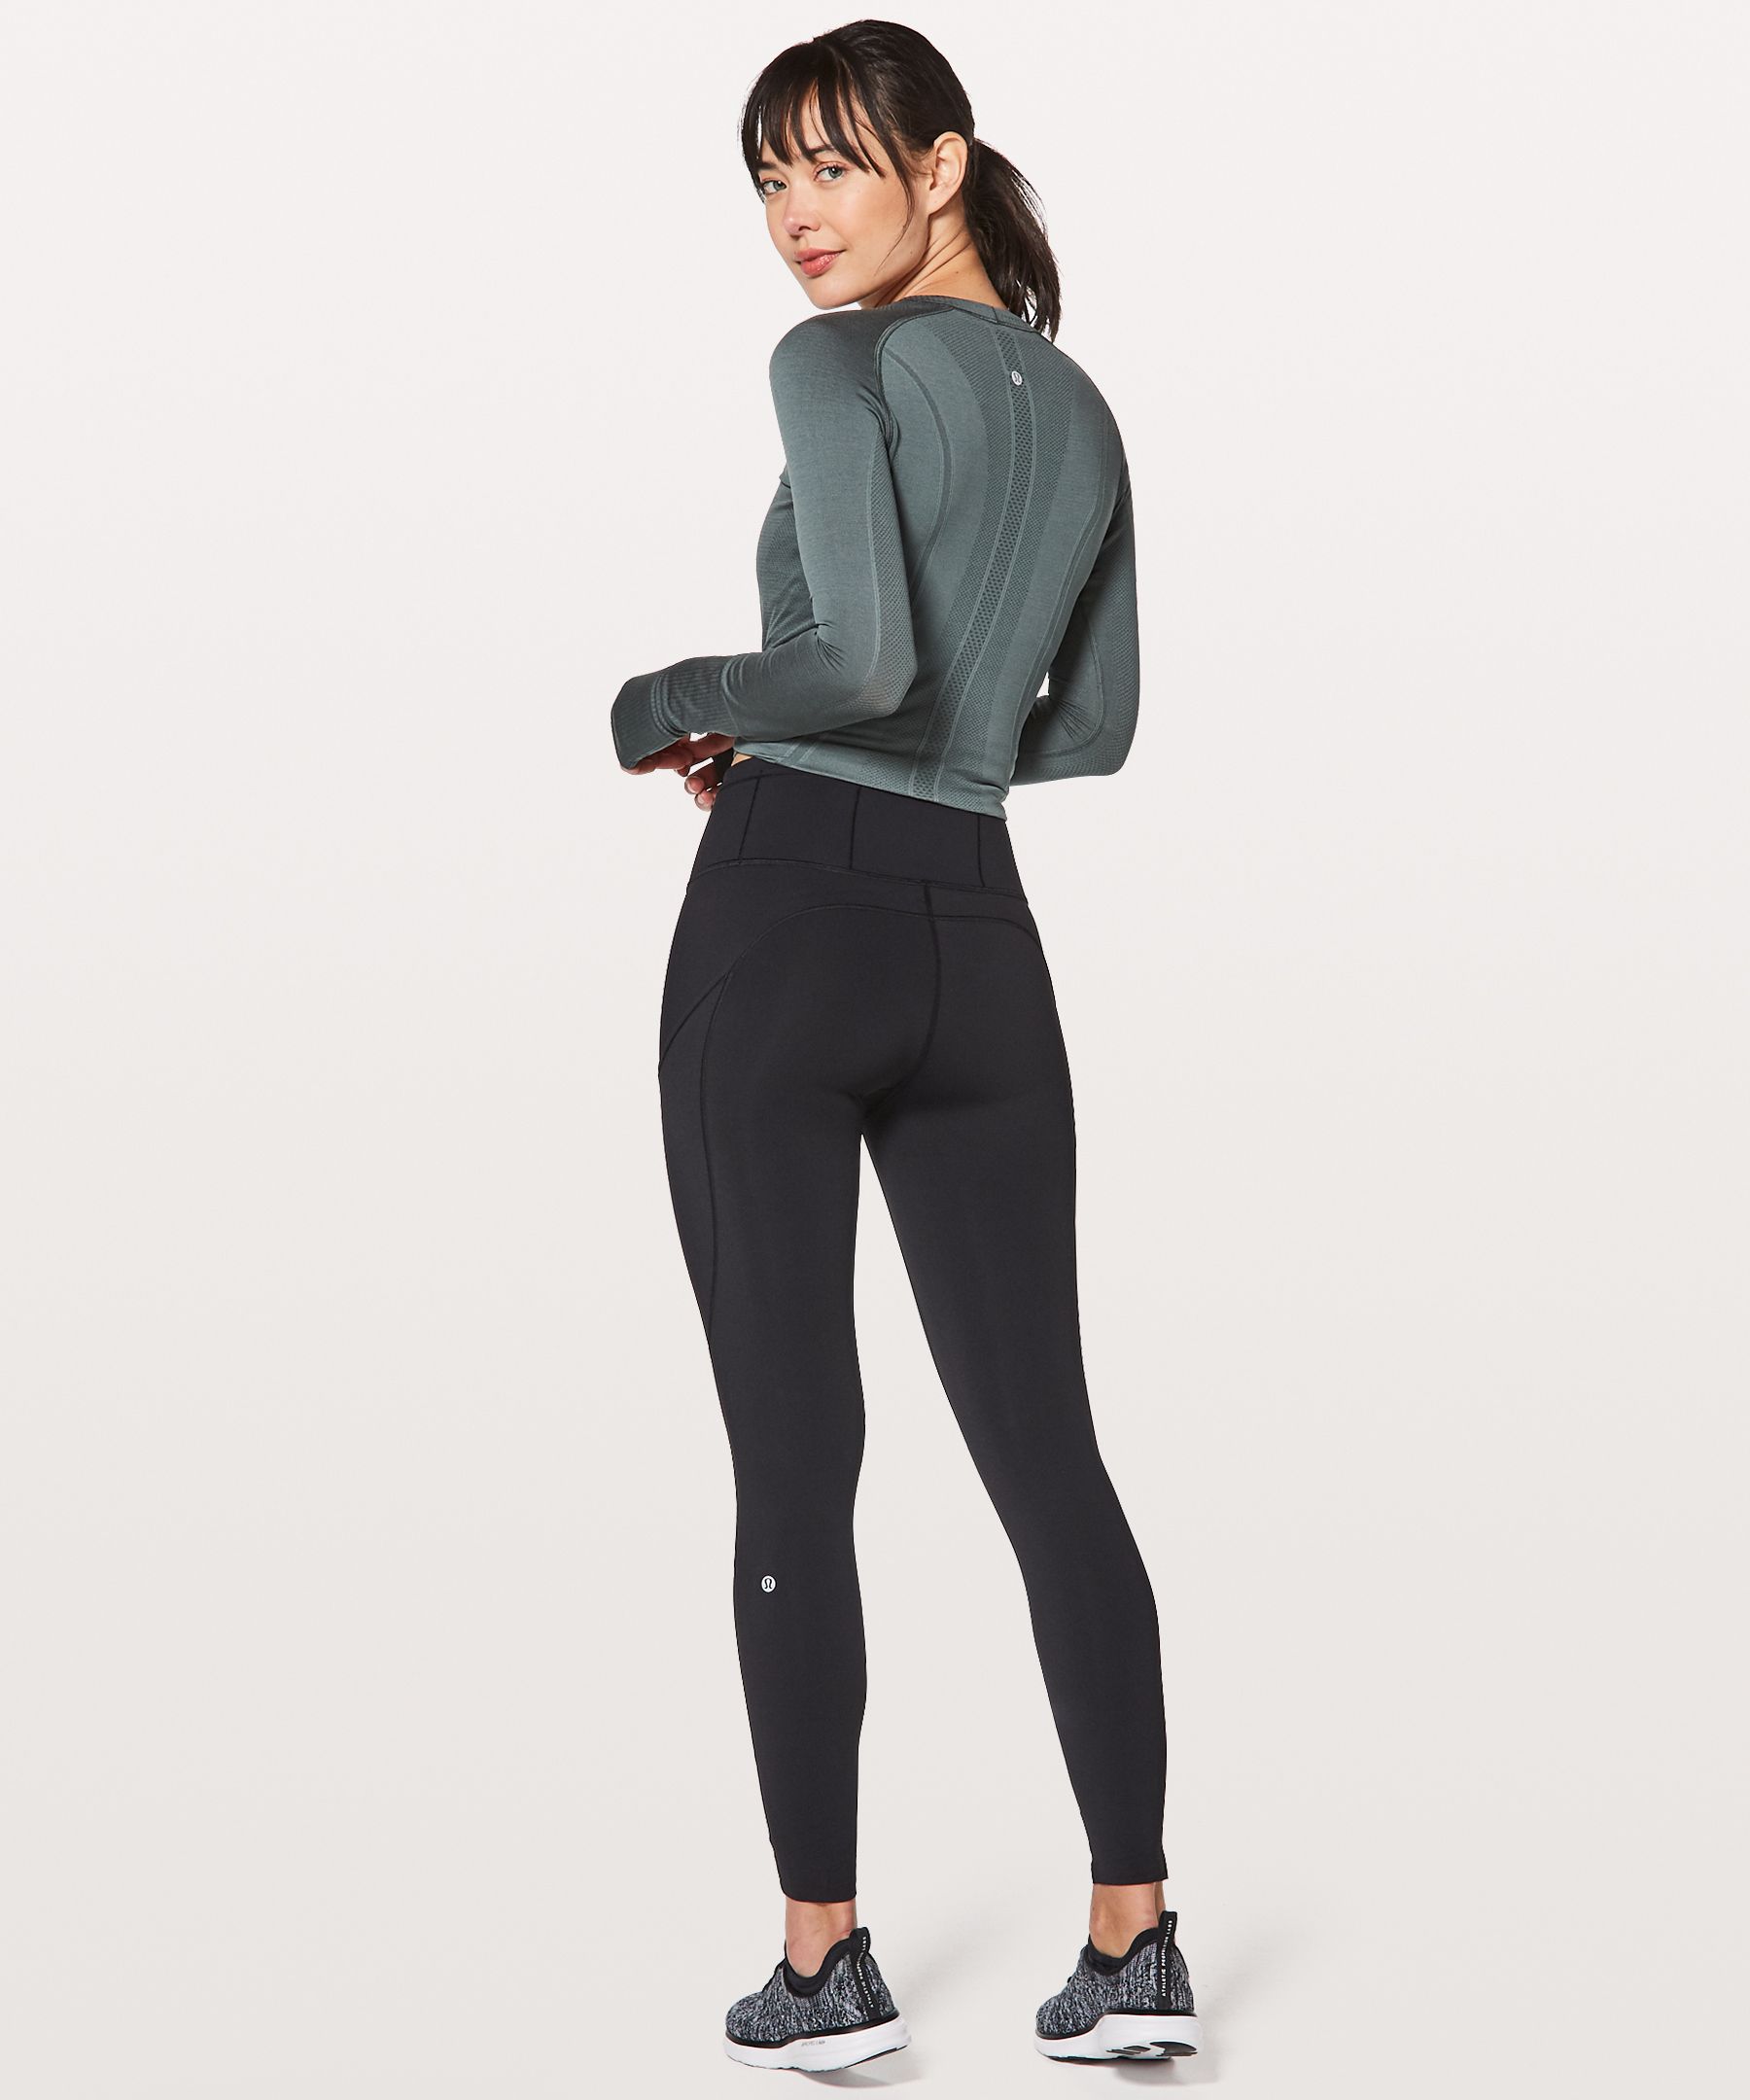 Lululemon RARE Mind Over Miles Tight 25” White Size 2 - $30 (74% Off  Retail) - From Hannah